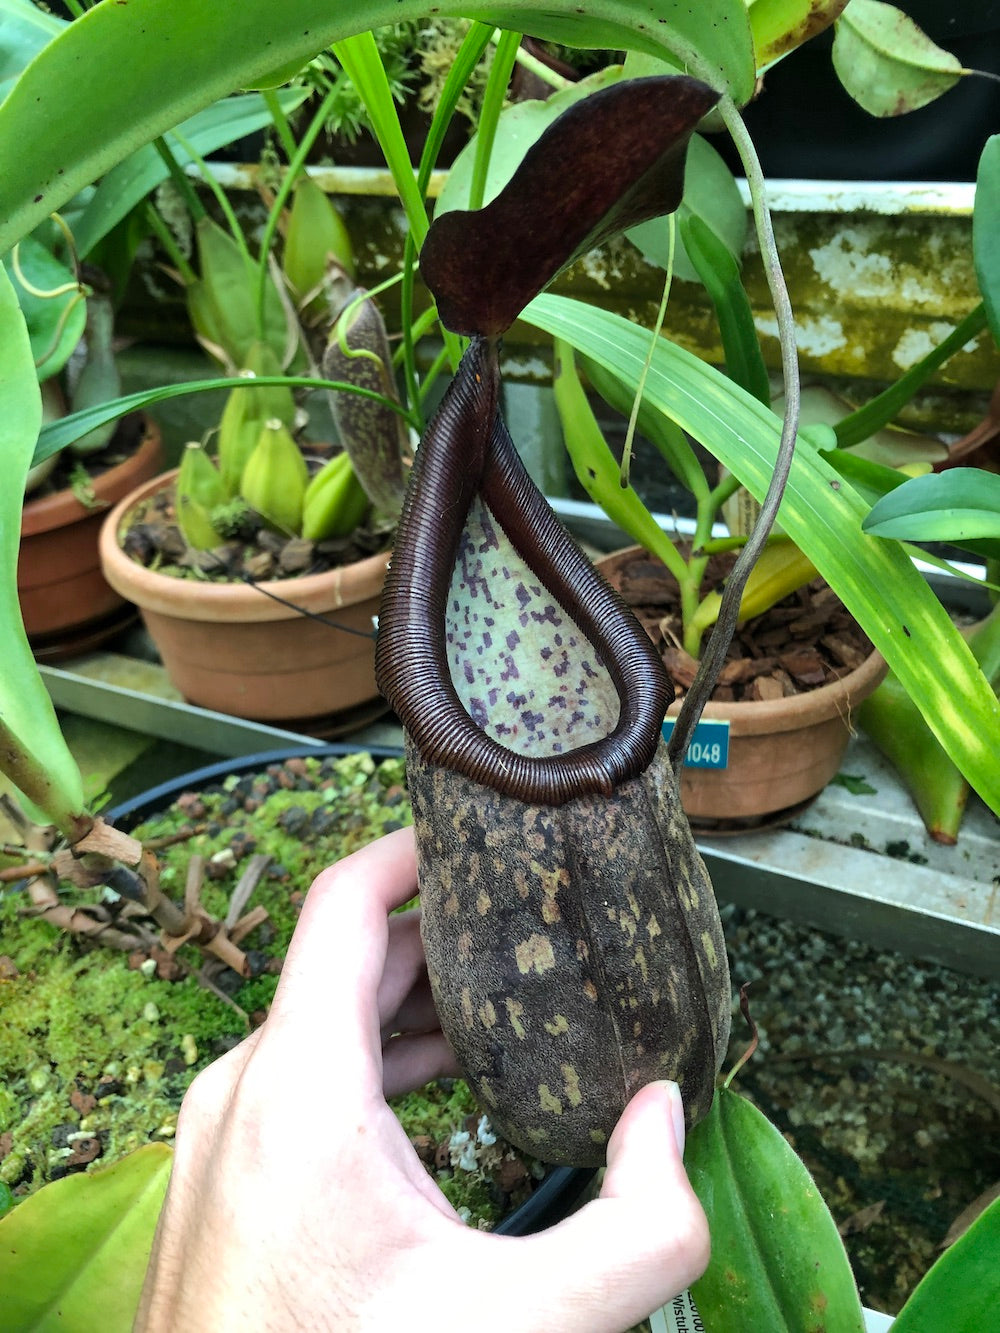 The Endangered Nepenthes